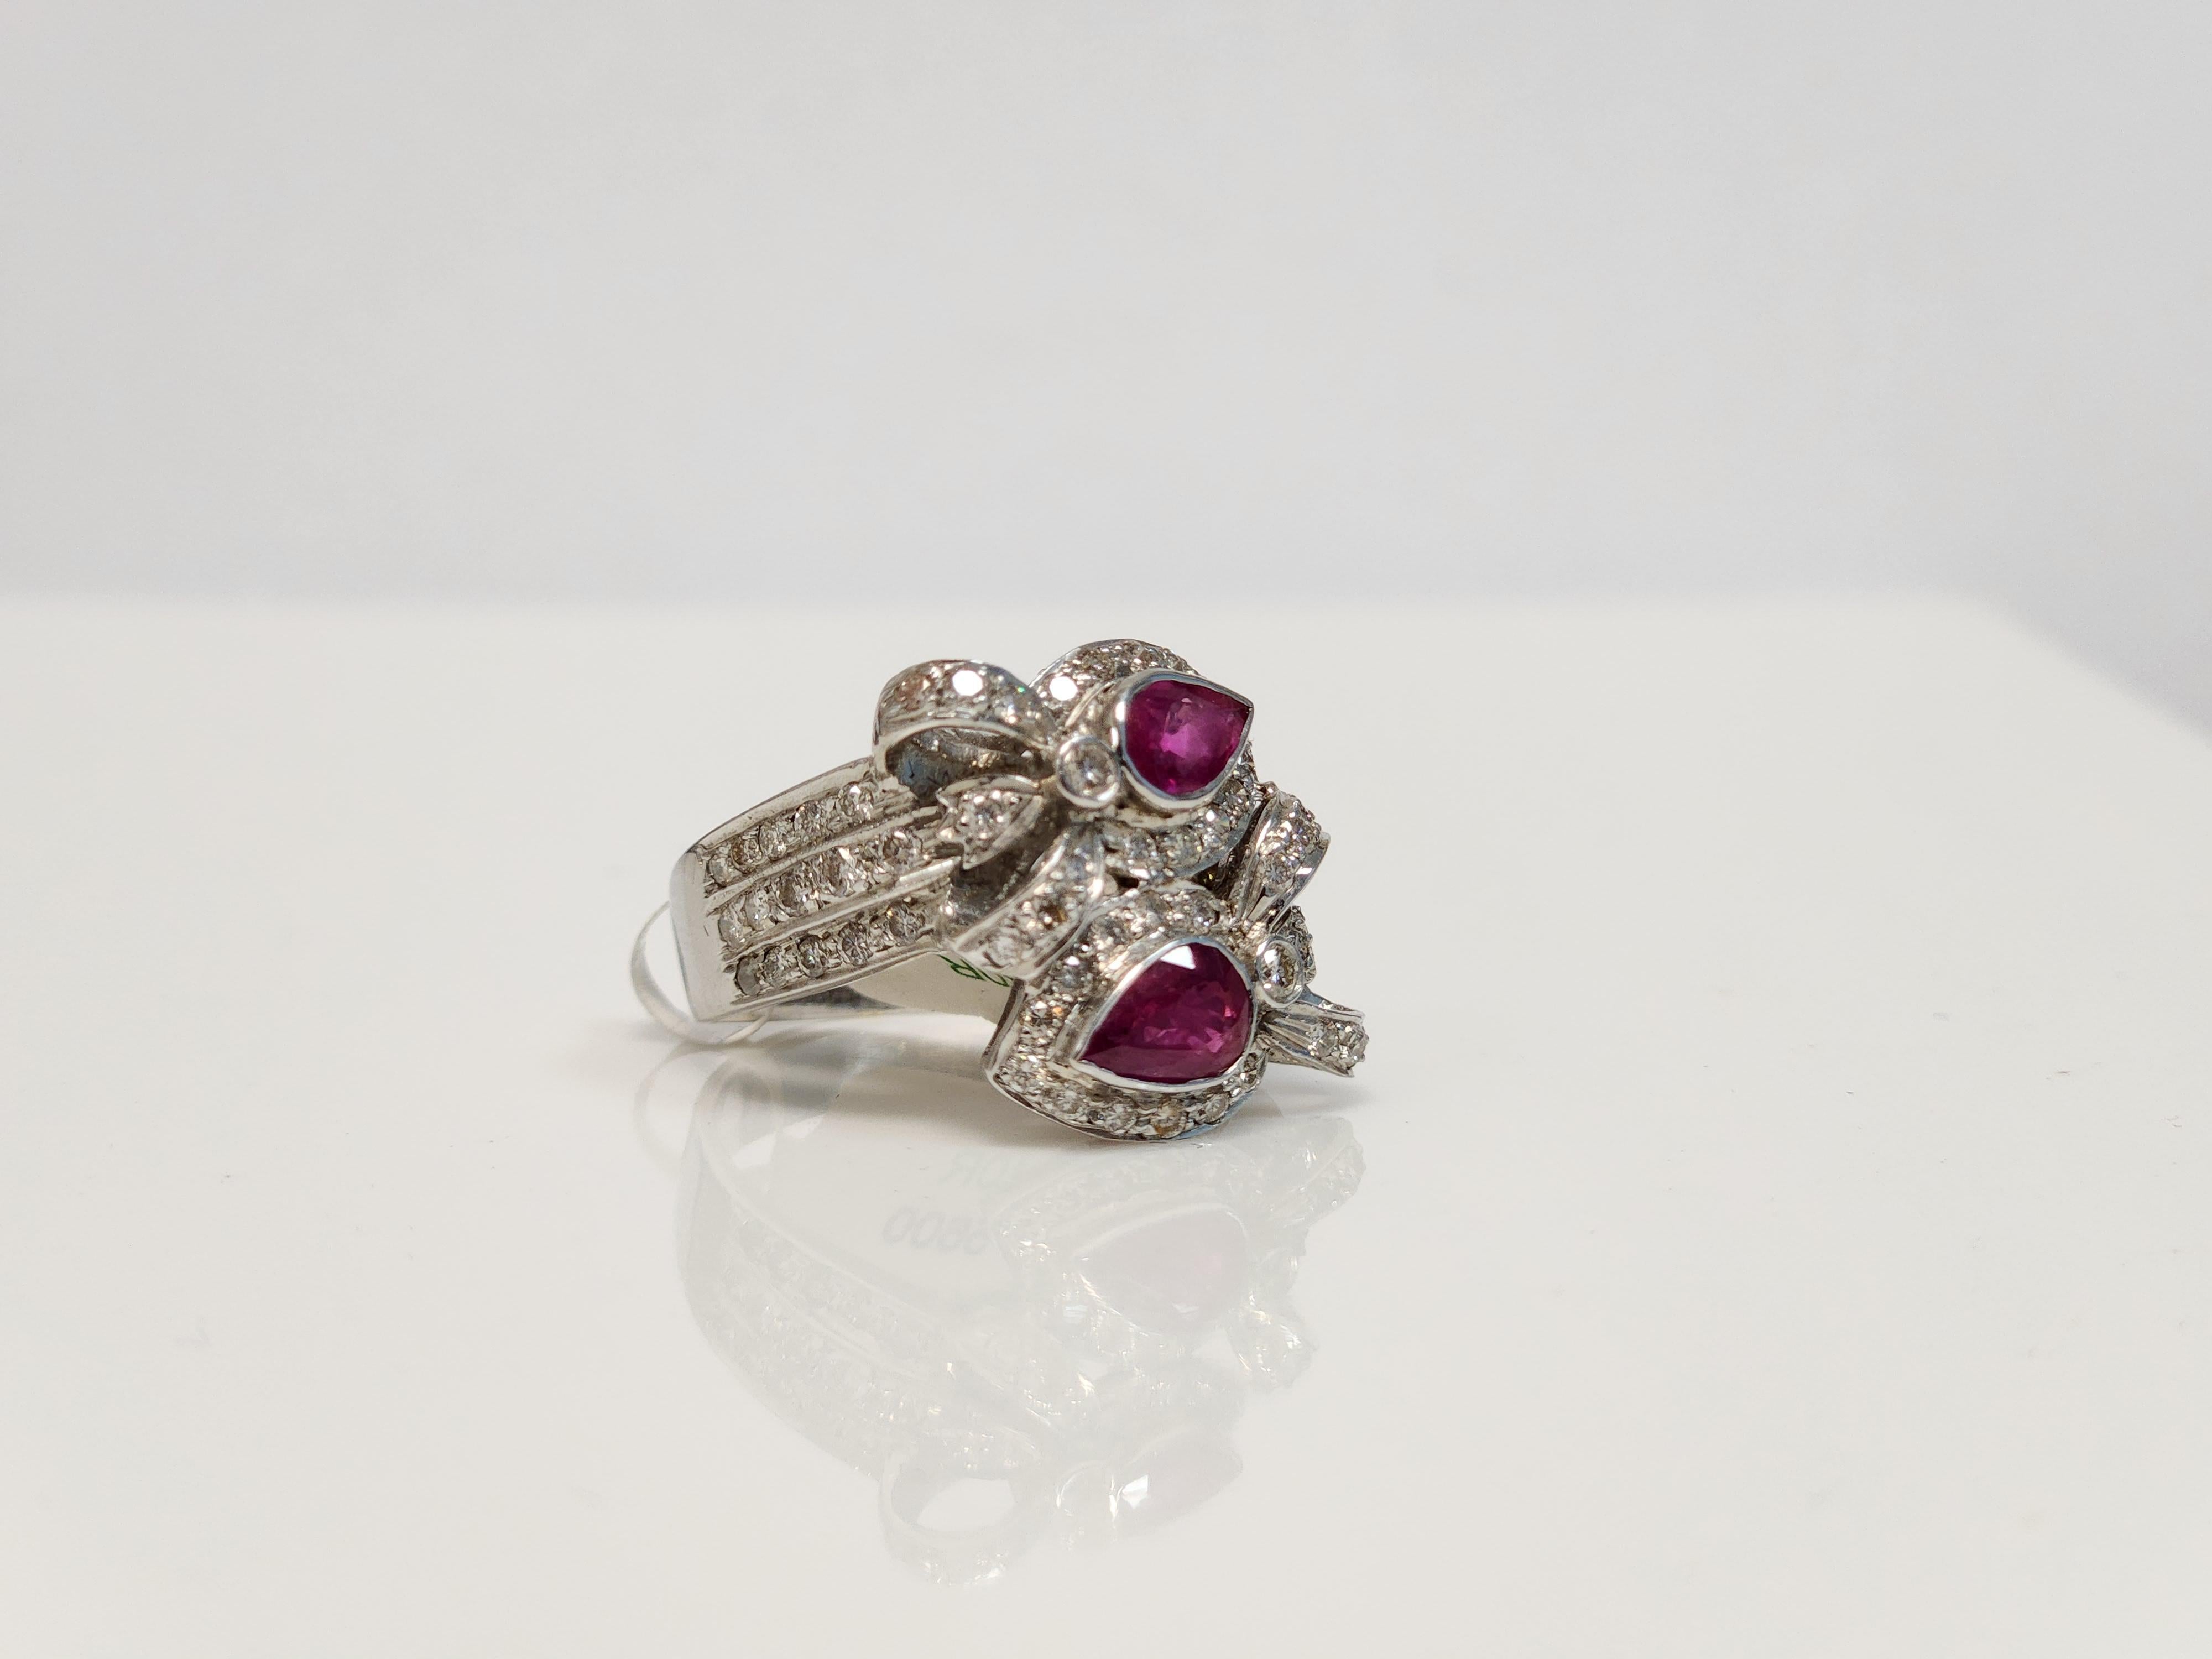 Indulge in the allure of vibrant red with this exquisite 2 Pear Shaped Red Ruby Bypass Ring. The two 0.65 carat pear-shaped red rubies elegantly bypass each other, surrounded by a halo of 1.05 carat white melee diamonds that add a stunning sparkle